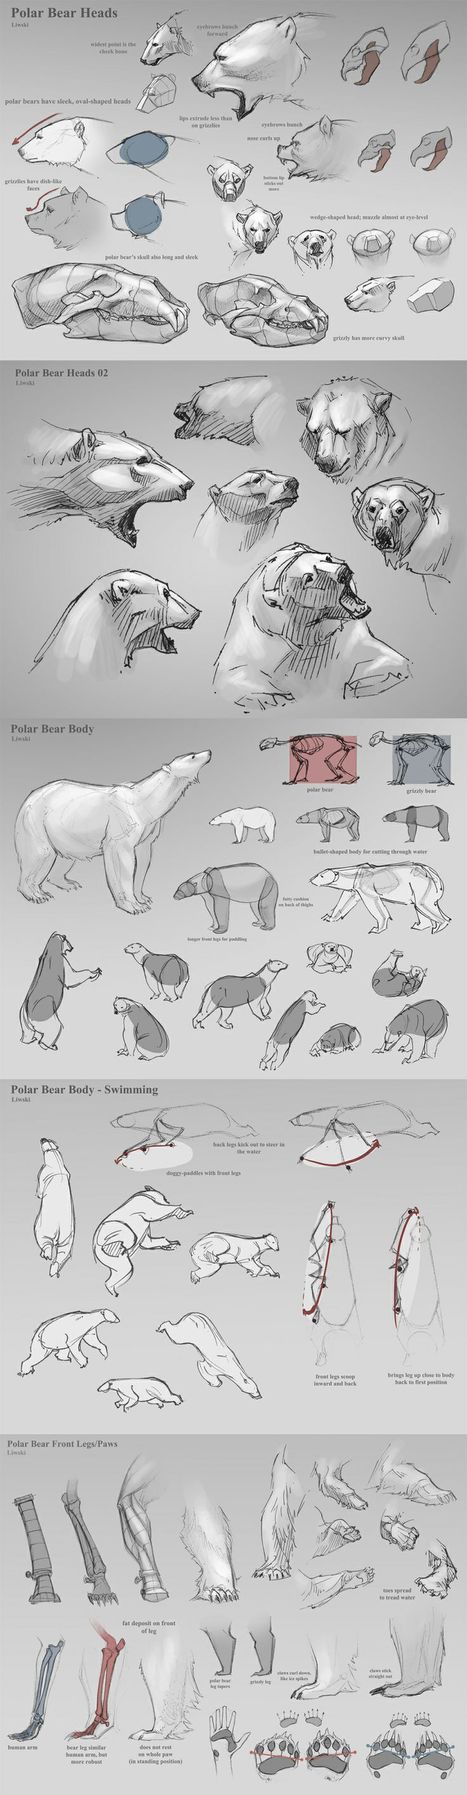 Polar Bear Heads Drawing Tutorial | Drawing References and Resources | Scoop.it